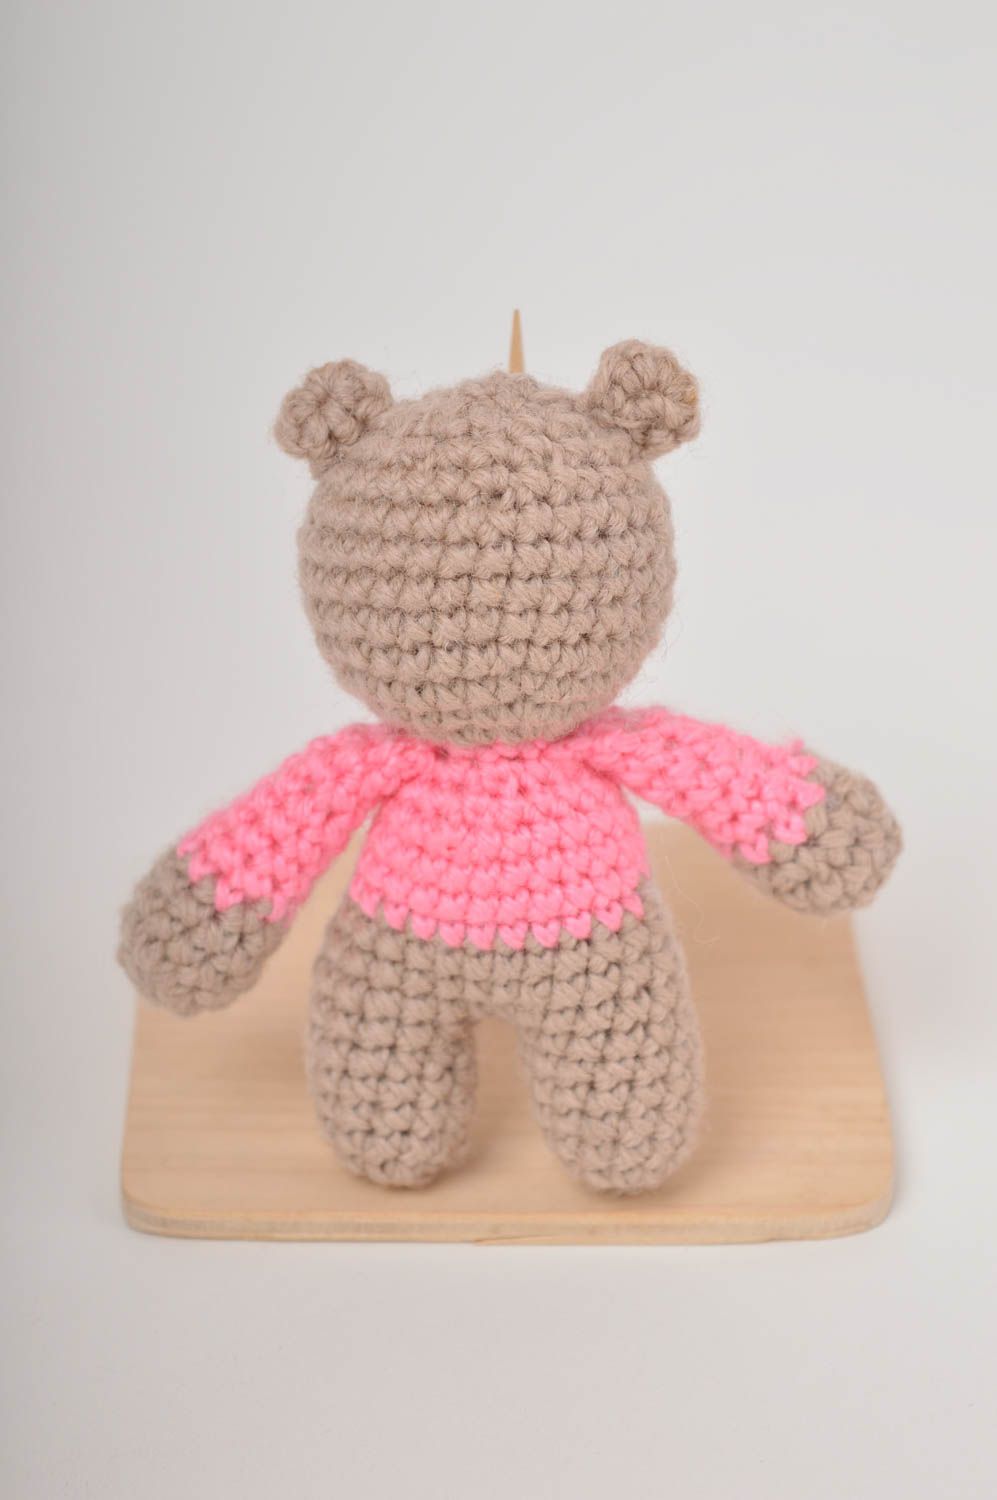 Handmade crocheted soft toy stuffed toys for children hand-crocheted toys photo 3